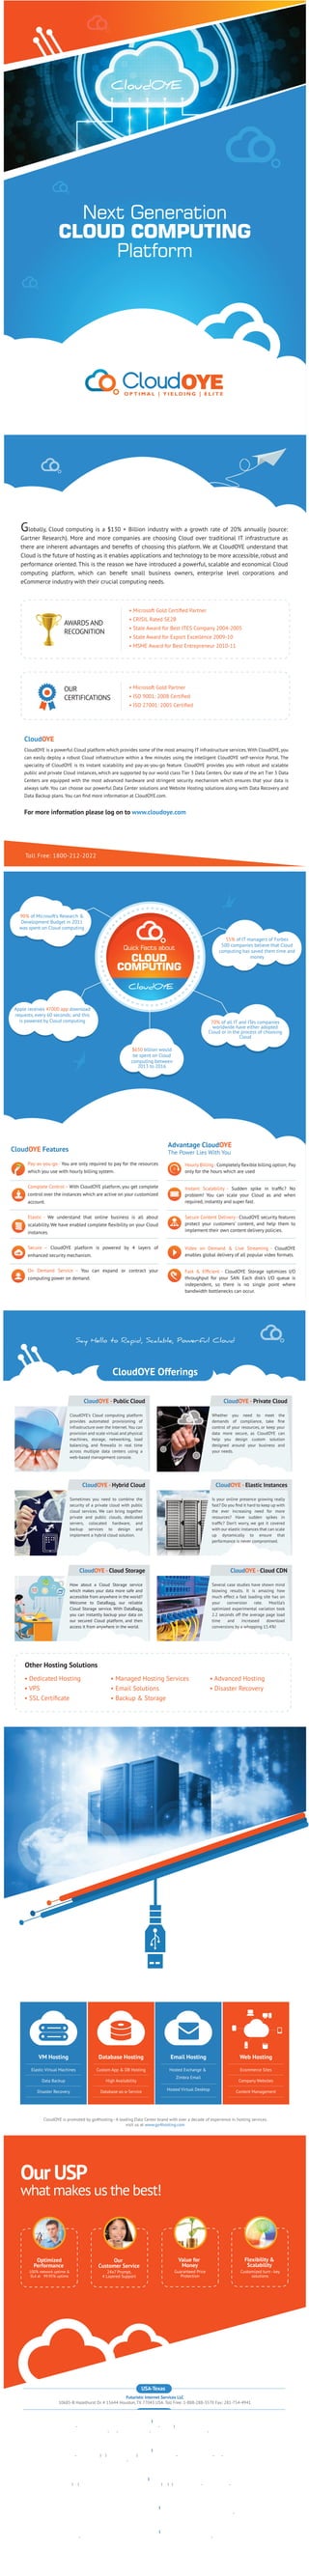 Globally, Cloud computing is a $130 + Billion industry with a growth rate of 20% annually (source:
Gartner Research). More and more companies are choosing Cloud over traditional IT infrastructure as
there are inherent advantages and beneﬁts of choosing this platform. We at CloudOYE understand that
Cloud is the future of hosting as it enables applications and technology to be more accessible, robust and
performance oriented. This is the reason we have introduced a powerful, scalable and economical Cloud
computing platform, which can beneﬁt small business owners, enterprise level corporations and
eCommerce industry with their crucial computing needs.
• Microsoft Gold Certiﬁed Partner
• CRISIL Rated SE2B
• State Award for Best ITES Company 2004-2005
• State Award for Export Excellence 2009-10
• MSME Award for Best Entrepreneur 2010-11
AWARDS AND
RECOGNITION
• Microsoft Gold Partner
• ISO 9001: 2008 Certiﬁed
• ISO 27001: 2005 Certiﬁed
OUR
CERTIFICATIONS
CloudOYE is a powerful Cloud platform which provides some of the most amazing IT infrastructure services.With CloudOYE,you
can easily deploy a robust Cloud infrastructure within a few minutes using the intelligent CloudOYE self-service Portal. The
speciality of CloudOYE is its instant scalability and pay-as-you-go feature. CloudOYE provides you with robust and scalable
public and private Cloud instances, which are supported by our world class Tier 3 Data Centers. Our state of the art Tier 3 Data
Centers are equipped with the most advanced hardware and stringent security mechanism which ensures that your data is
always safe. You can choose our powerful Data Center solutions and Website Hosting solutions along with Data Recovery and
Data Backup plans. You can ﬁnd more information at CloudOYE.com.
For more information please log on to www.cloudoye.com
CloudOYE
Toll Free: 1800-212-2022
90% of Microsoft’s Research &
Development Budget in 2011
was spent on Cloud computing
70% of all IT and ITes companies
worldwide have either adopted
Cloud or in the process of choosing
Cloud
$650 billion would
be spent on Cloud
computing between
2013 to 2016
Apple receives 47000 app download
requests, every 60 seconds; and this
is powered by Cloud computing
55% of IT managers of Forbes
500 companies believe that Cloud
computing has saved them time and
money
Advantage CloudOYE
The Power Lies With YouCloudOYE Features
Pay-as-you-go - You are only required to pay for the resources
which you use with hourly billing system.
Complete Control – With CloudOYE platform, you get complete
control over the instances which are active on your customized
account.
Elastic - We understand that online business is all about
scalability. We have enabled complete ﬂexibility on your Cloud
instances.
Secure – CloudOYE platform is powered by 4 layers of
enhanced security mechanism.
On Demand Service – You can expand or contract your
computing power on demand.
Hourly Billing -Completely ﬂexible billing option; Pay
only for the hours which are used
Instant Scalability - Sudden spike in trafﬁc? No
problem! You can scale your Cloud as and when
required, instantly and super fast.
Secure Content Delivery - CloudOYE security features
protect your customers’ content, and help them to
implement their own content delivery policies.
Video on Demand & Live Streaming - CloudOYE
enables global delivery of all popular video formats.
Fast & Efﬁcient - CloudOYE Storage optimizes I/O
throughput for your SAN. Each disk’s I/O queue is
independent, so there is no single point where
bandwidth bottlenecks can occur.
CloudOYE Offerings
• Dedicated Hosting
• VPS
• SSL Certiﬁcate
• Managed Hosting Services
• Email Solutions
• Backup & Storage
• Advanced Hosting
• Disaster Recovery
CloudOYE - Public Cloud
CloudOYE’s Cloud computing platform
provides automated provisioning of
infrastructure over the Internet.You can
provision and scale virtual and physical
machines, storage, networking, load
balancing, and ﬁrewalls in real time
across multiple data centers using a
web-based management console.
CloudOYE - Private Cloud
Whether you need to meet the
demands of compliance, take ﬁne
control of your resources, or keep your
data more secure, as CloudOYE can
help you design custom solution
designed around your business and
your needs.
CloudOYE - Hybrid Cloud
Sometimes you need to combine the
security of a private cloud with public
cloud services. We can bring together
private and public clouds, dedicated
servers, colocated hardware, and
backup services to design and
implement a hybrid cloud solution.
CloudOYE - Elastic Instances
Is your online presence growing really
fast? Do you ﬁnd it hard to keep up with
the ever increasing need for more
resources? Have sudden spikes in
trafﬁc? Don’t worry, we got it covered
with our elastic instances that can scale
up dynamically to ensure that
performance is never compromised.
CloudOYE - Cloud Storage
How about a Cloud Storage service
which makes your data more safe and
accessible from anywhere in the world?
Welcome to DataBagg, our reliable
Cloud Storage service. With DataBagg,
you can instantly backup your data on
our secured Cloud platform, and then
access it from anywhere in the world.
CloudOYE - Cloud CDN
Several case studies have shown mind
blowing results. It is amazing how
much effect a fast loading site has on
your conversion rate. Mozilla’s
optimized experimental variation took
2.2 seconds off the average page load
time and increased download
conversions by a whopping 15.4%!
Other Hosting Solutions
CloudOYE is promoted by go4hosting - A leading Data Center brand with over a decade of experience in hosting services.
visit us at www.go4hosting.com
VM Hosting
Elastic Virtual Machines
Data Backup
Disaster Recovery
Database Hosting
Custom App & DB Hosting
High Availability
Database-as-a-Service
Email Hosting
Hosted Exchange &
Zimbra Email
Hosted Virtual Desktop
Web Hosting
Ecommerce Sites
Company Websites
Content Management
Our USP
what makes us the best!
Optimized
Performance
100% network uptime &
SLA at 99.95% uptime
Our
Customer Service
24x7 Prompt,
4 Layered Support
Value for
Money
Guaranteed Price
Protection
Flexibility &
Scalability
Customized turn - key
solutions
Futuristic Internet Services LLC
10685-B Hazelhurst Dr. # 15644 Houston, TX 77043 USA. Toll Free: 1-888-288-3570 Fax: 281-754-4941
USA-Texas
Cyber Futuristics India Pvt Ltd
Akshaya Commercial Complex, 2nd Floor , No. 26/16 Victoria Road, Austin Town Bengaluru -560047
Bengaluru
Cyber Futuristics India Pvt Ltd
F-402 Titanium City Center,l00 ft Road, Anandnagar, Satelite Ahmedabad - GJ 380015
Ahmedabad
Go4Hosting Internet Datacenter
105, IJMIMA Commercial Complex, Link Road, Behind INFINITY Mall, Malad - West Mumbai - 400064.
Toll Free: 18002122022 Sales: 91.099309.61690
Mumbai
Cyber Futuristics India Private Limited
SDF G-13/14, Noida Special Economic Zone, Noida -05 , UP India. 24 X 7 Support: 91.120.6667.777
Phone: 91-120-6667700 Fax: 91-120.666.7766 Sales: 91.92124-13966
Noida
Cyber Futuristics India Private Limited
G1-227/228 , EPIP ,IT Park, Sitapura Industrial Area, Jaipur-302 022 Phone: 91-141-2770440
Fax: 91-141.277.0425 Sales: 91.98101.58920
Jaipur
www.cloudoye.com Email: sales@cloudoye.com
 